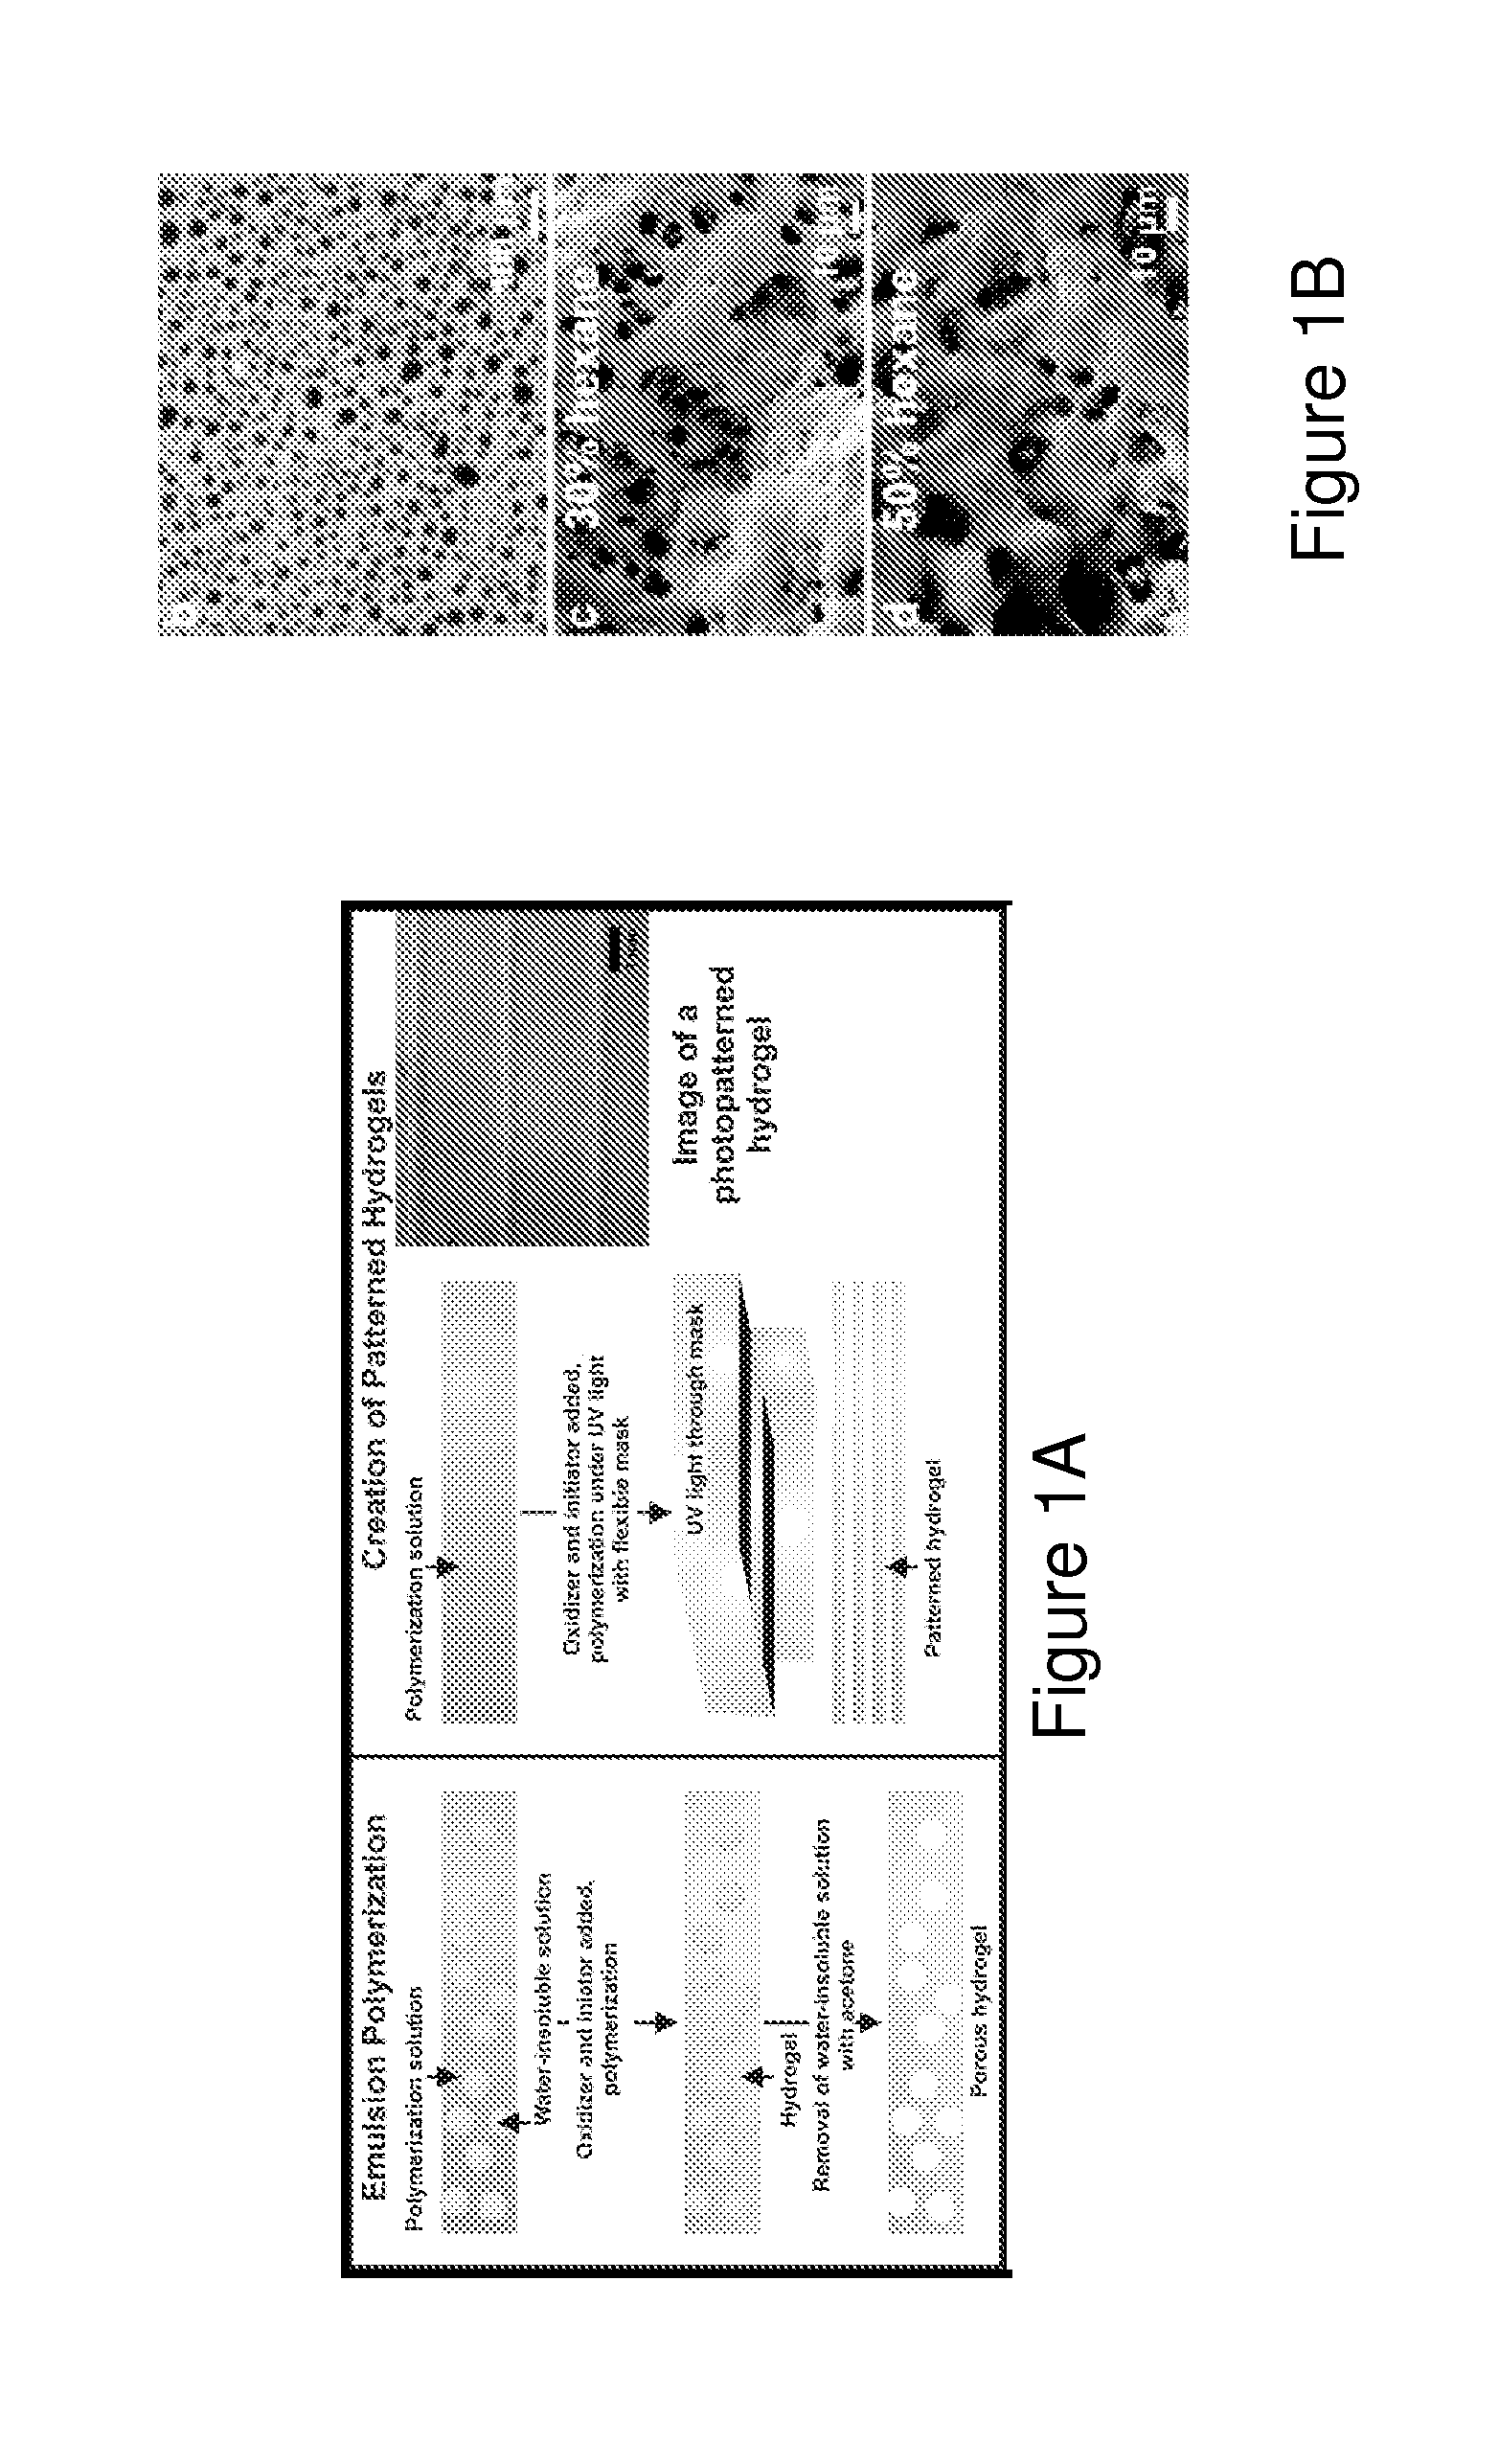 Porous electroactive hydrogels and uses thereof